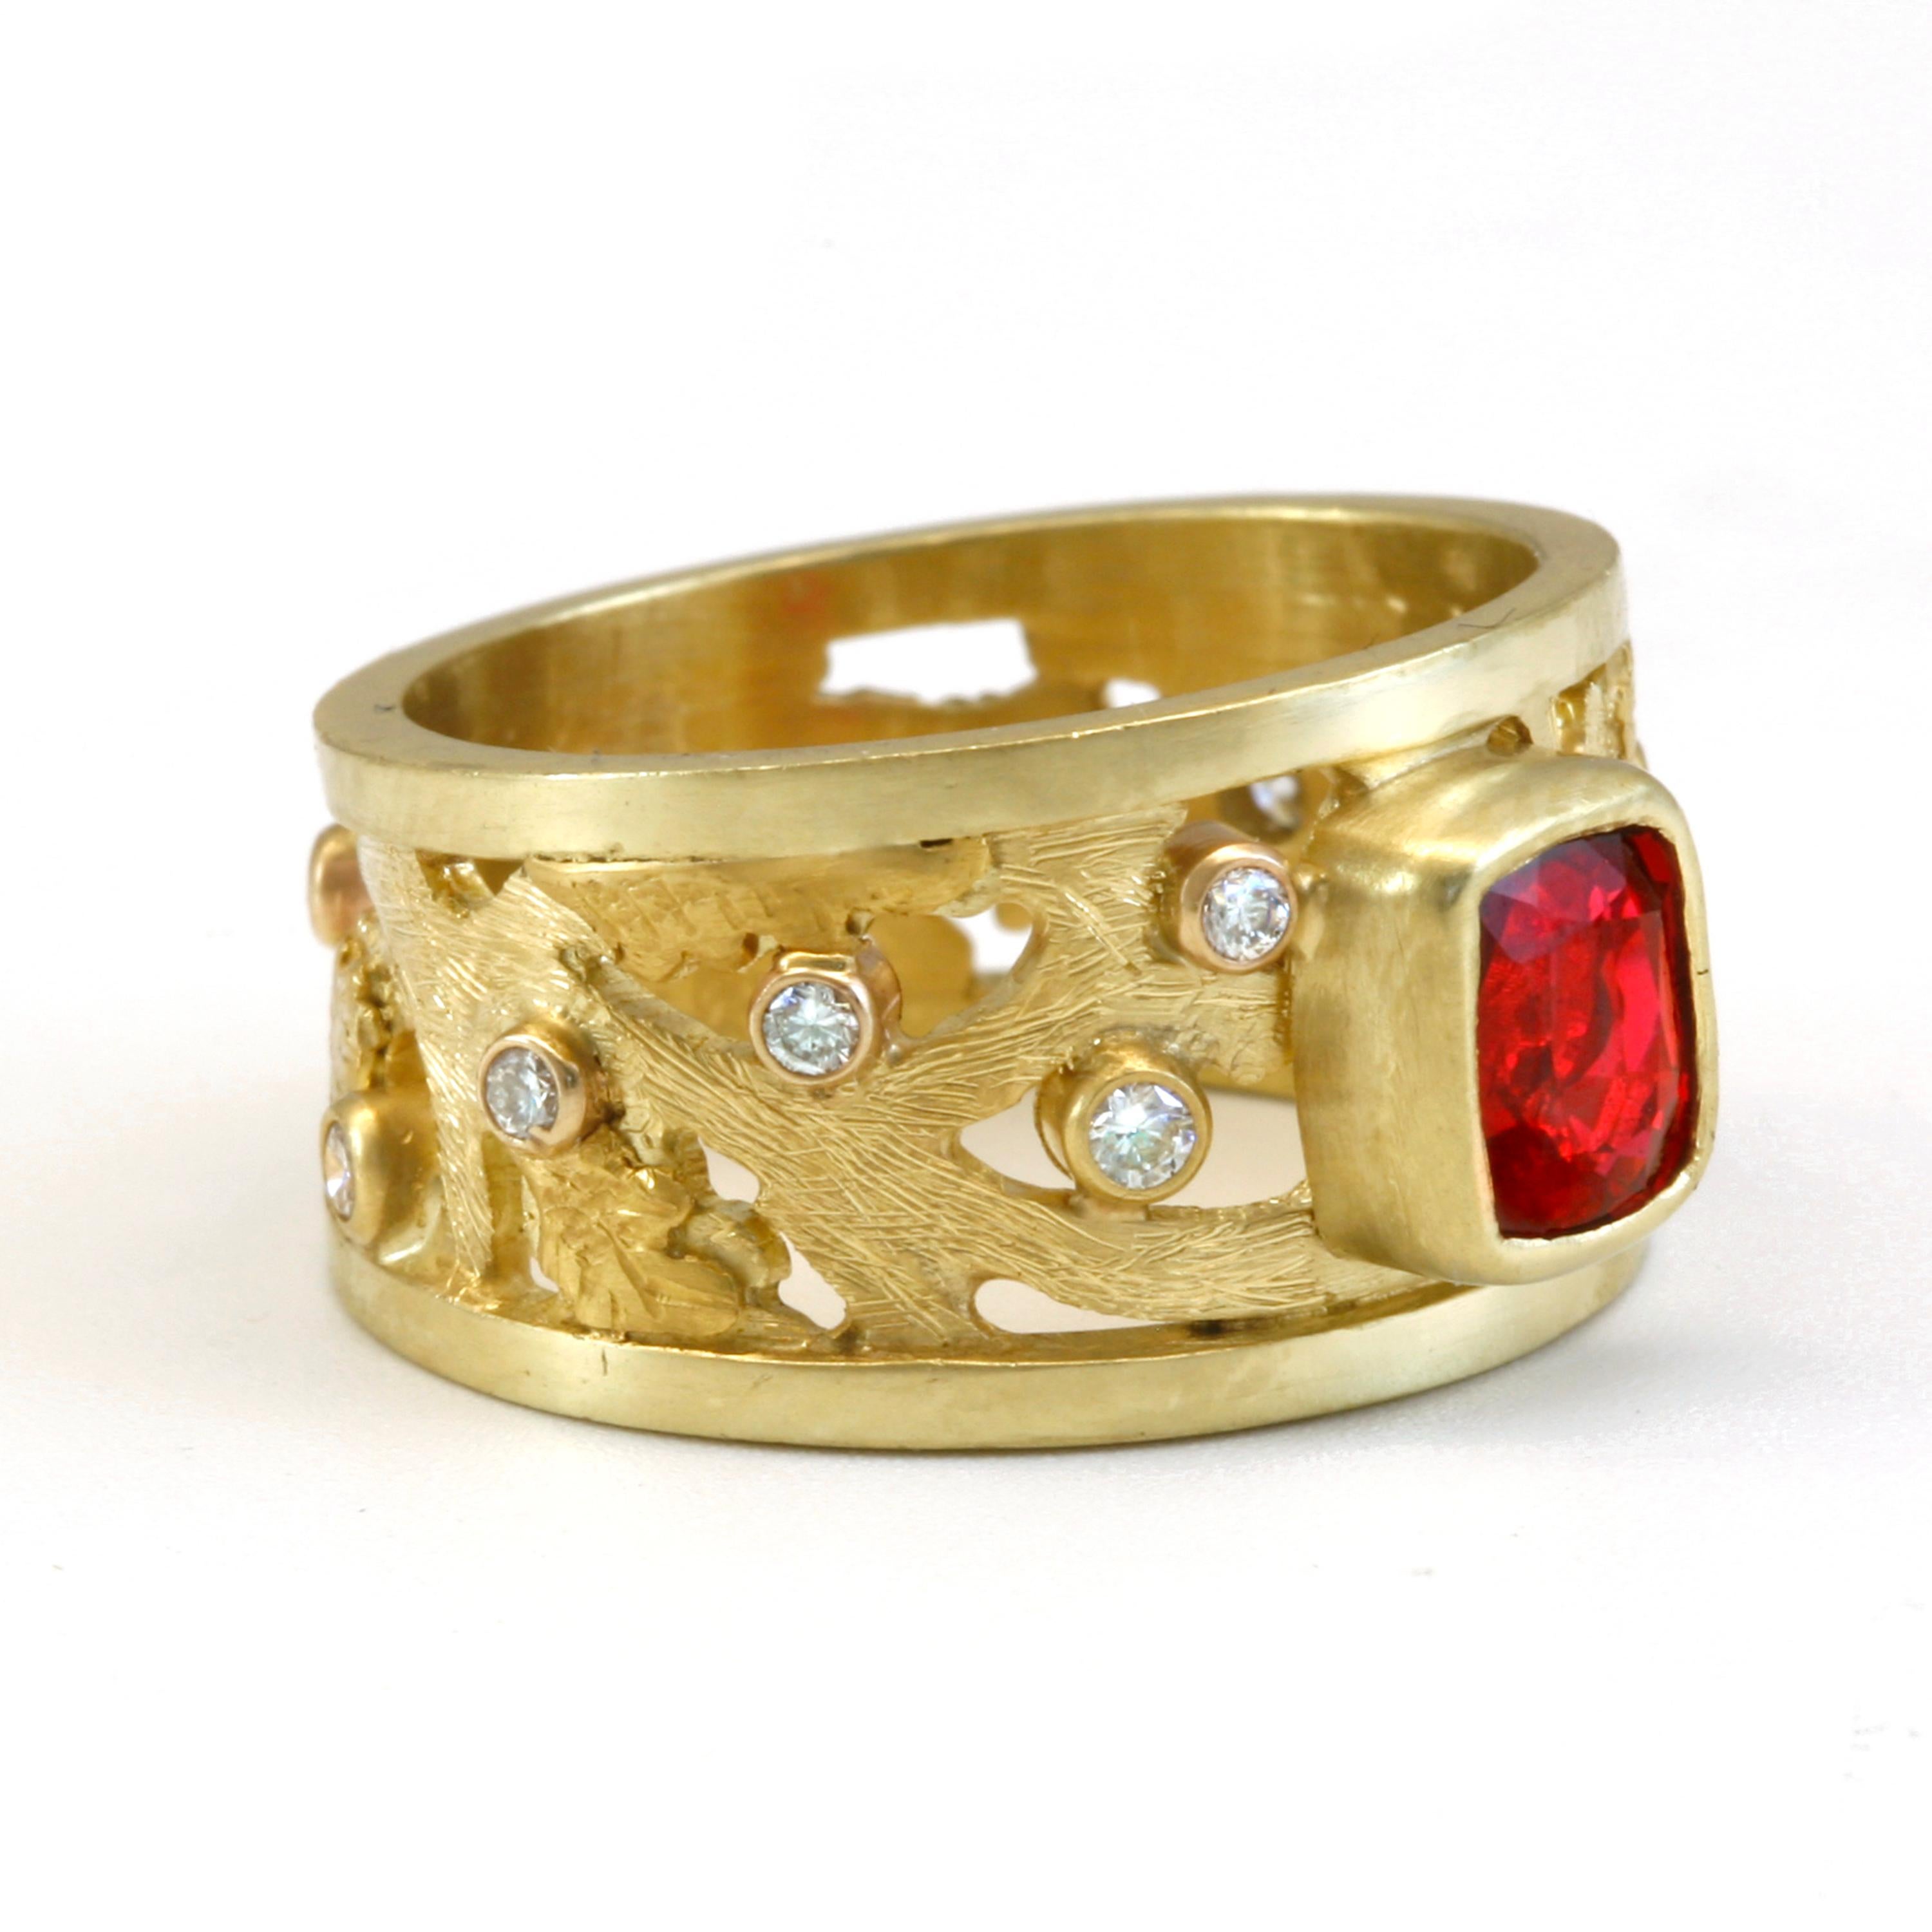 1.25 Carat Red Spinel with .27 ctw Diamonds set in 18k Gold Scrollwork Band, 10 x 8 mm.